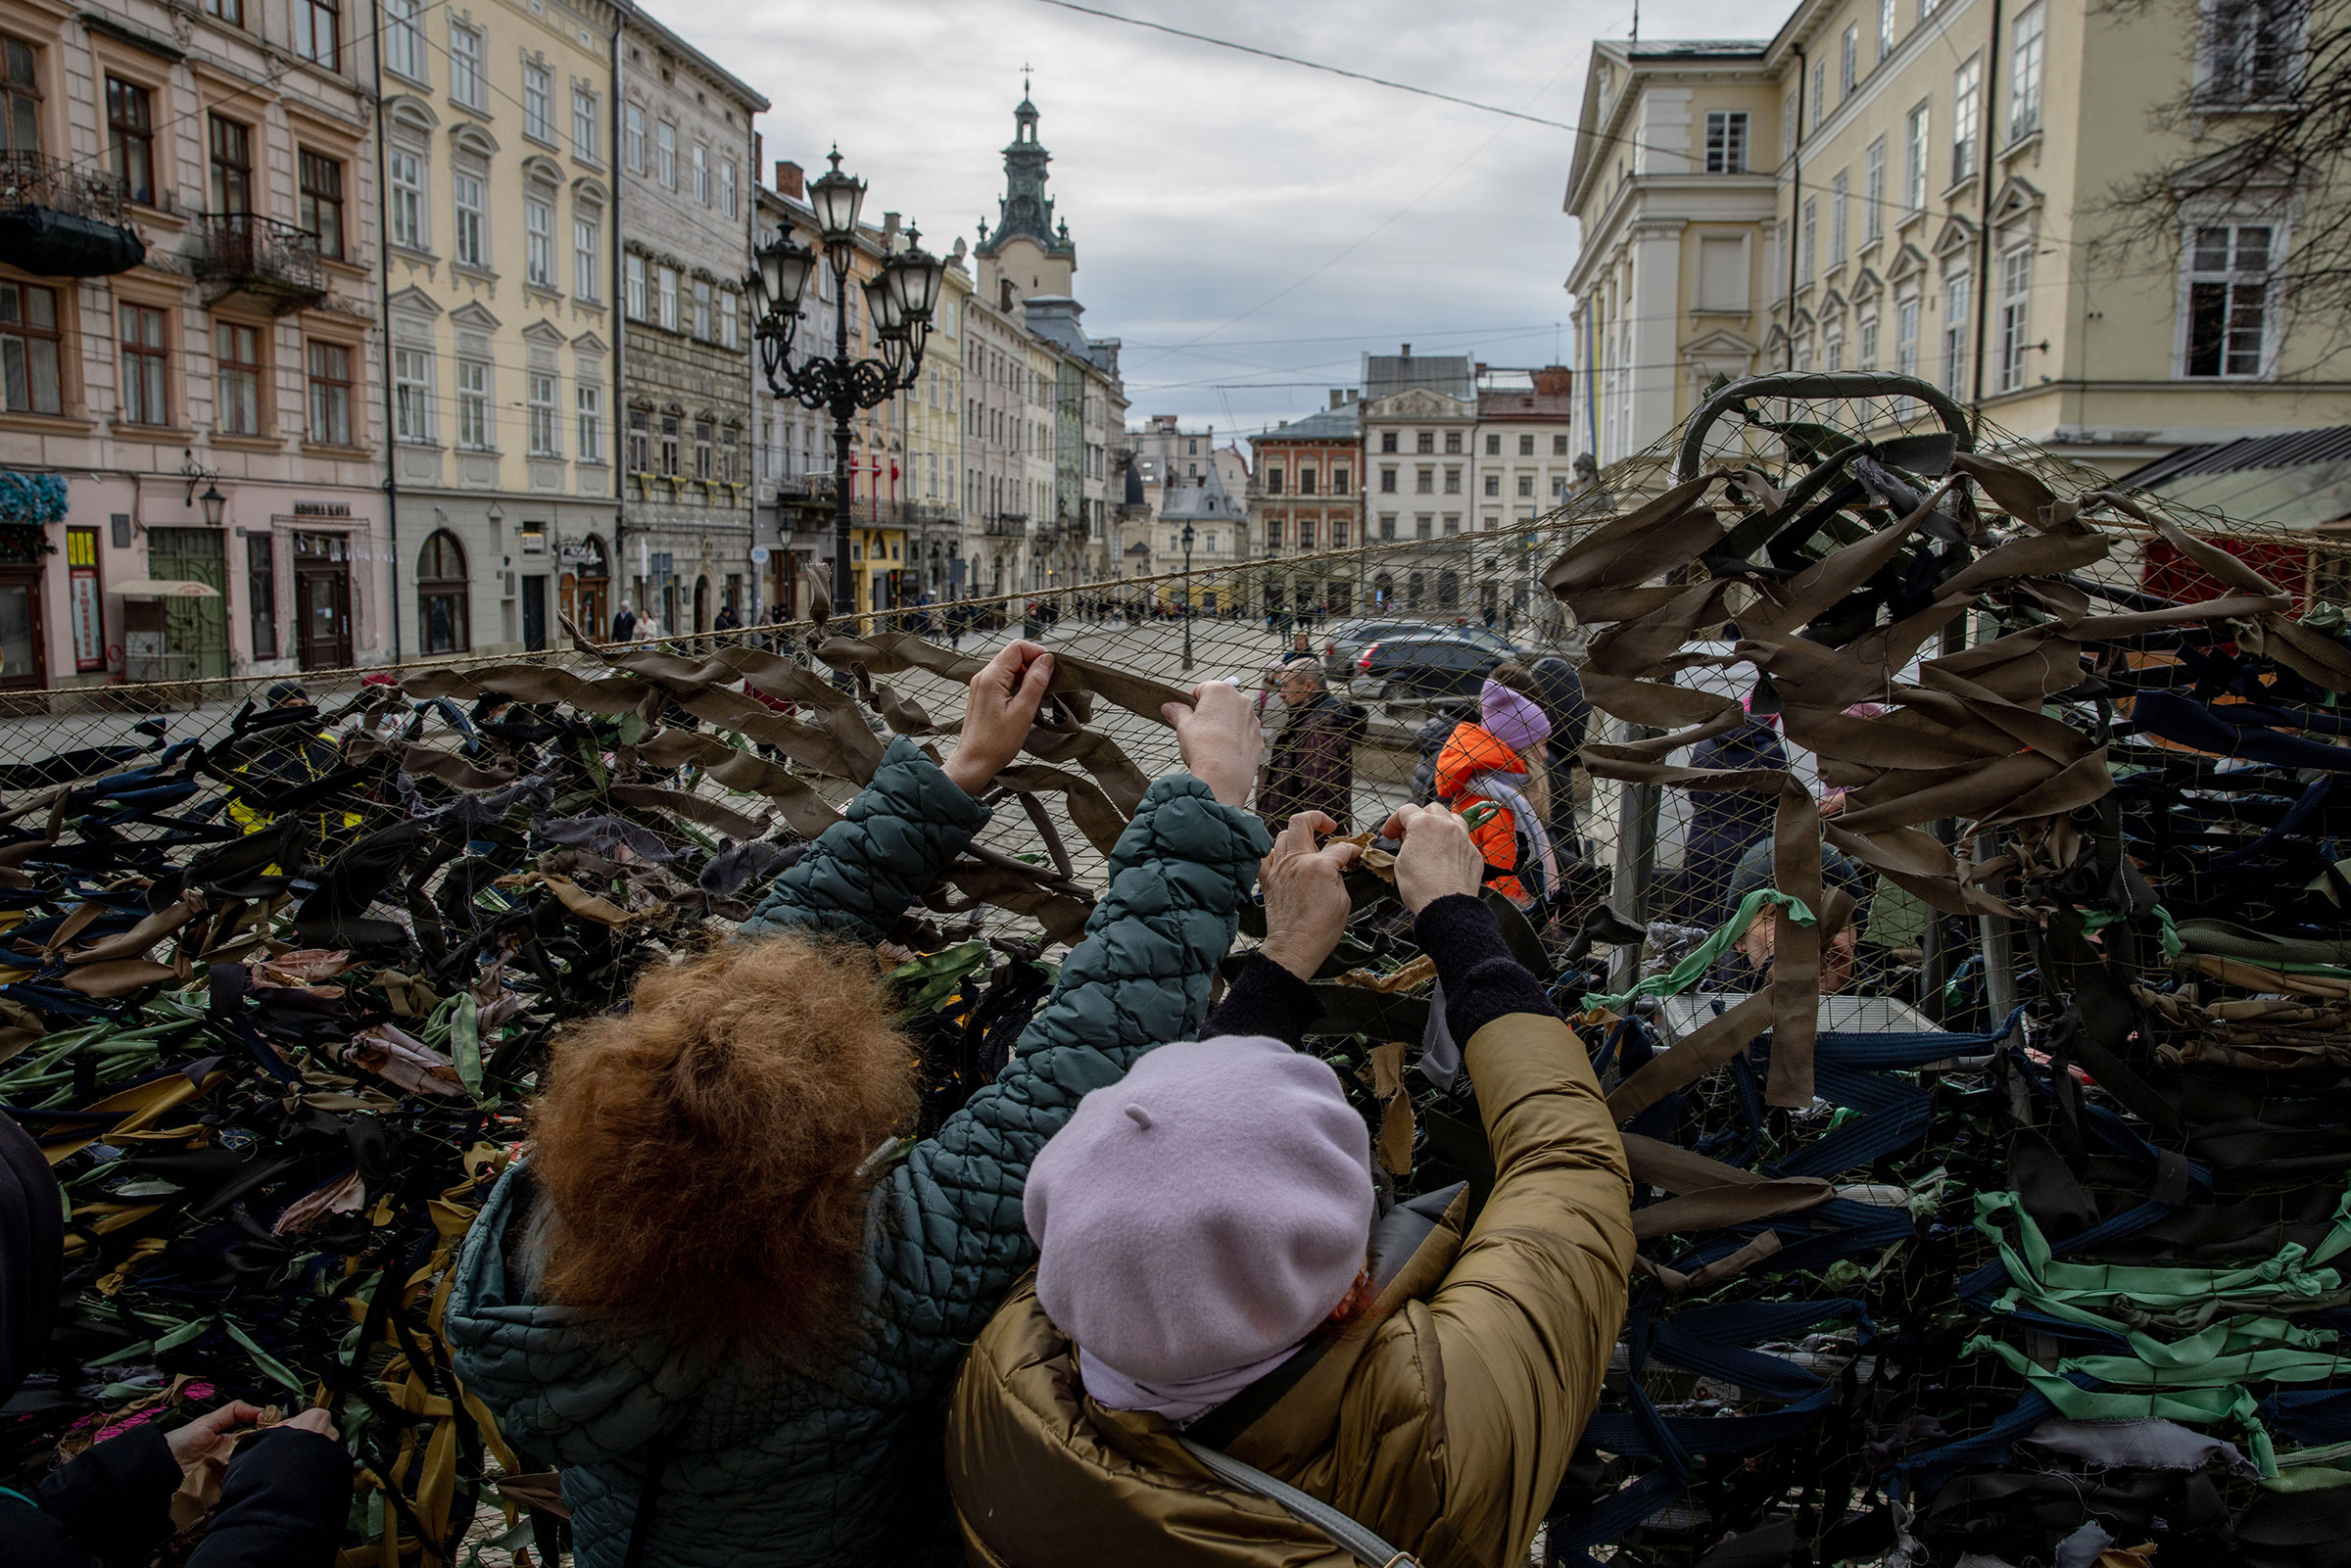 Volunteers tie pieces of fabric while making camouflage nets outside the Ivanychuk Library in Lviv on March 1. (Ethan Swope—Bloomberg/Getty Images)